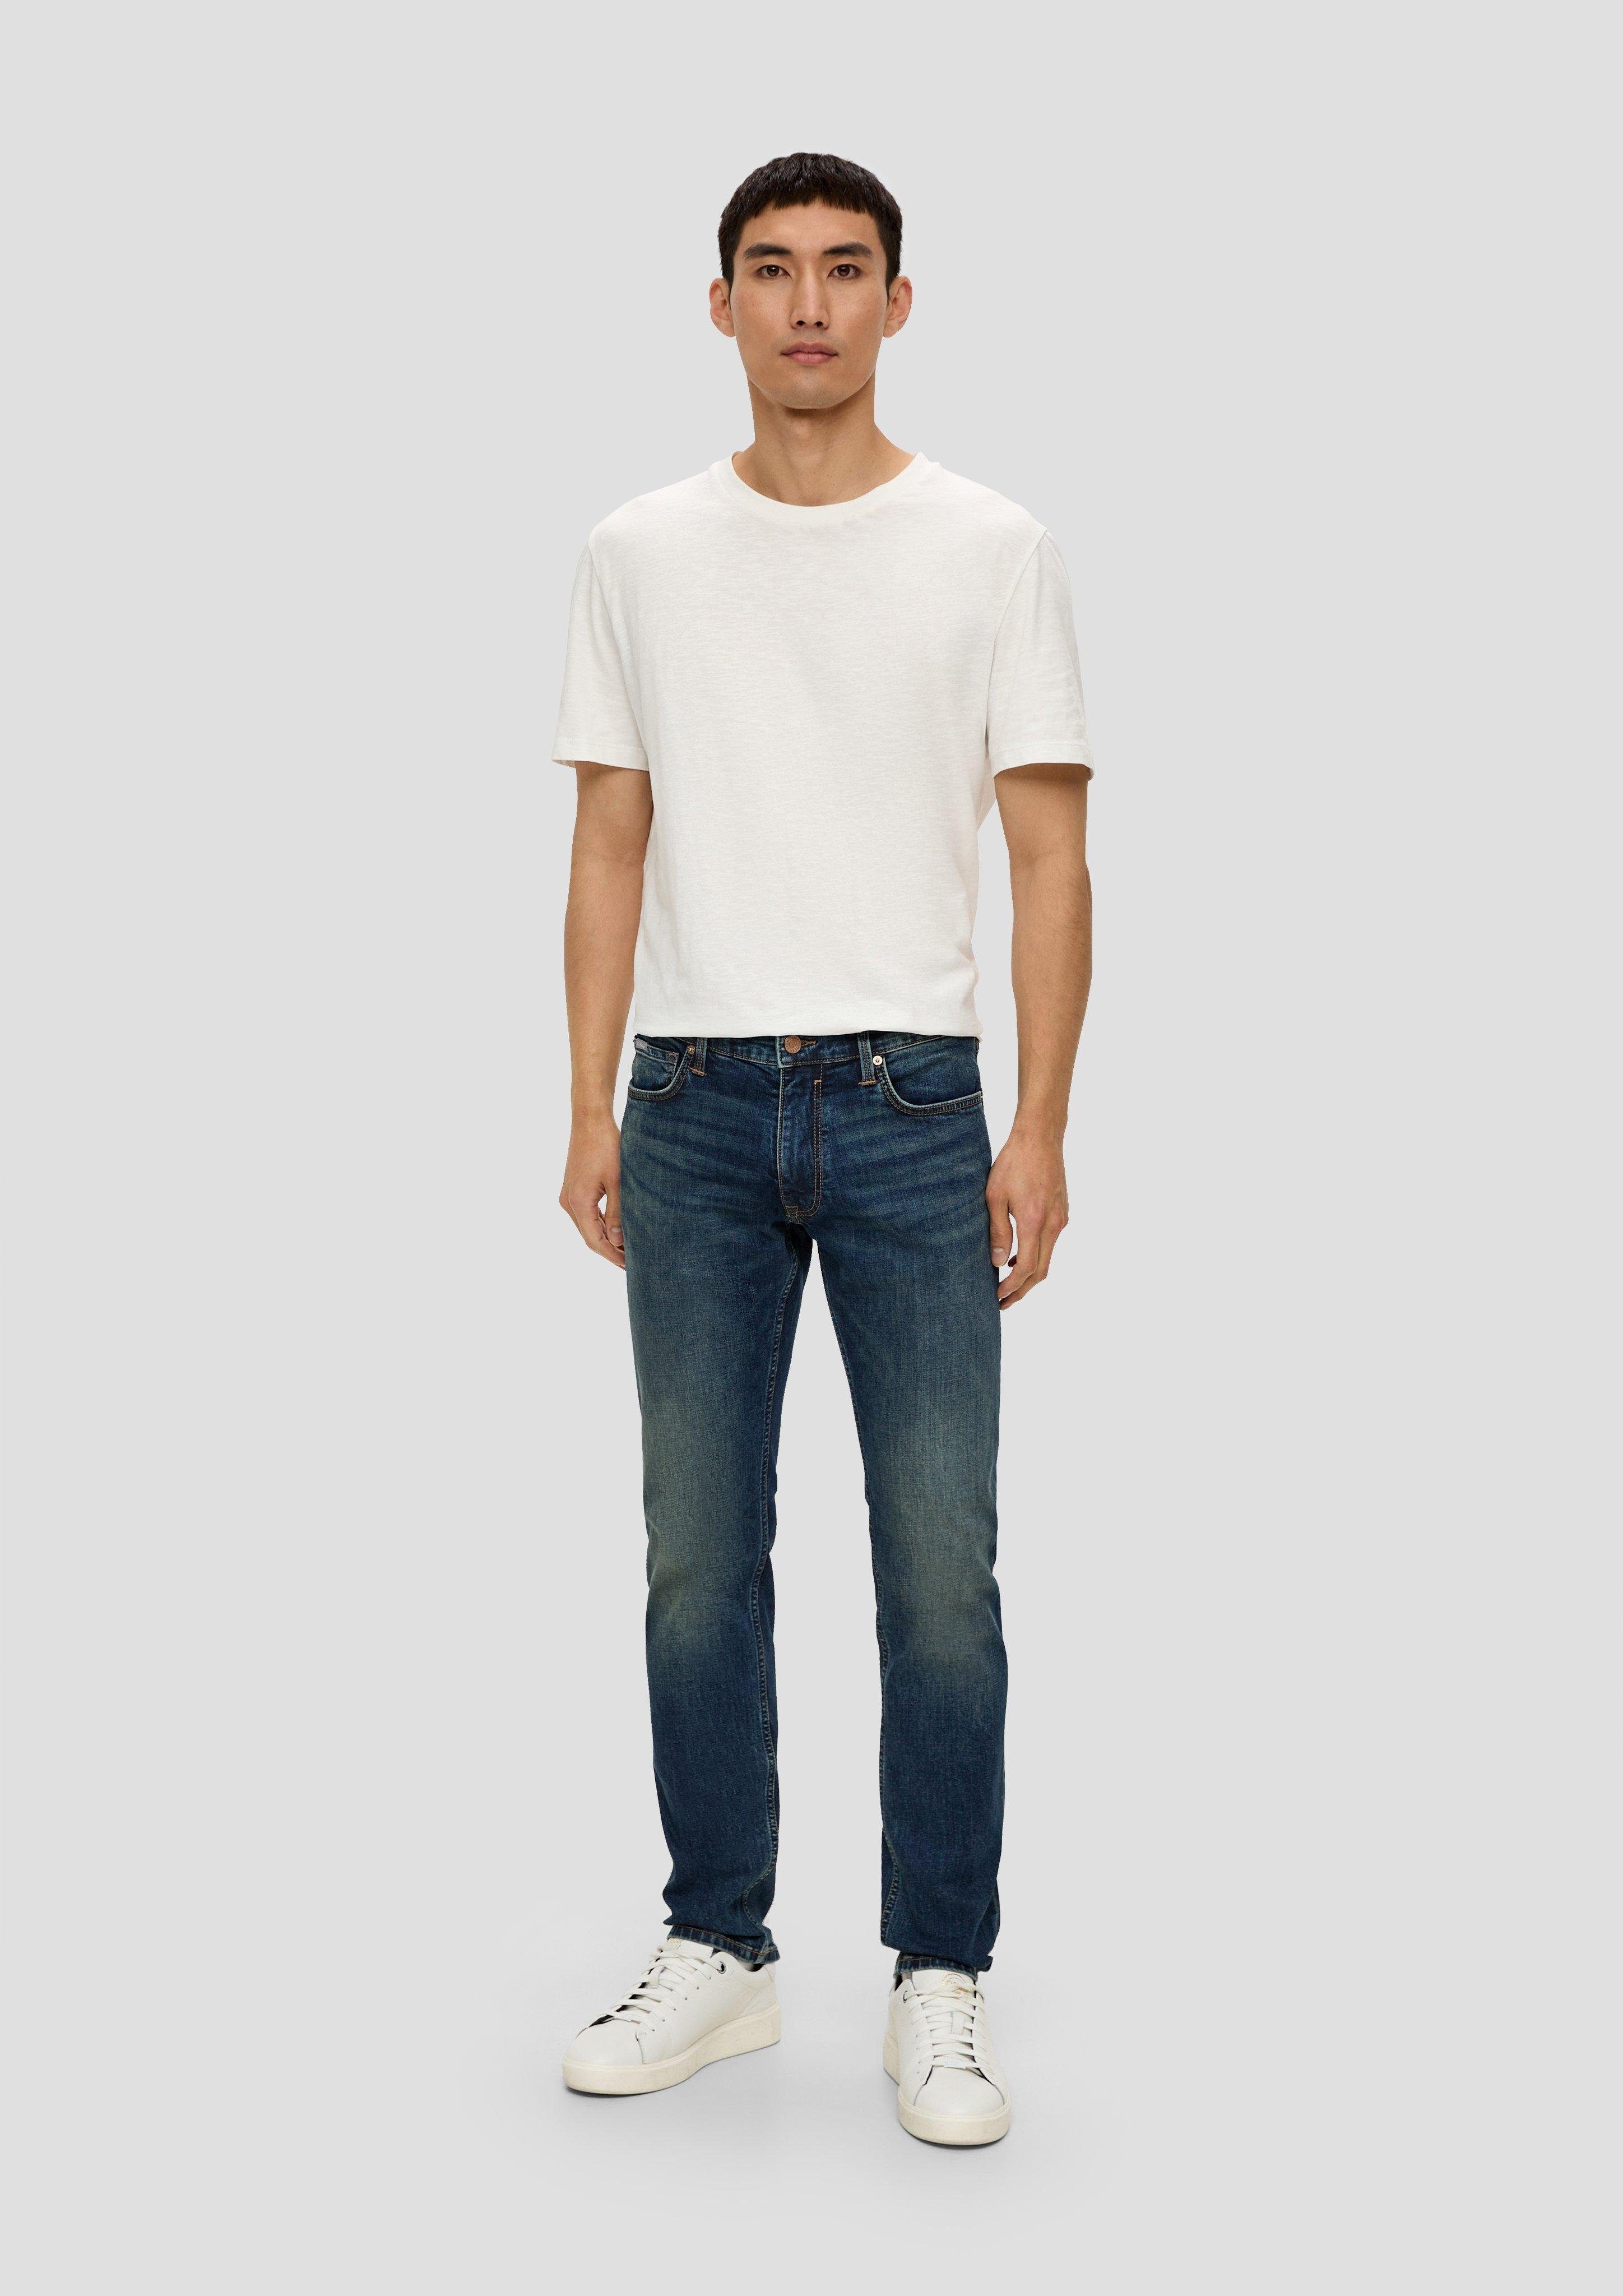 Label-Patch Slim / s.Oliver / Jeans Fit Stoffhose Straight Keith Mid Waschung, Leg / Rise